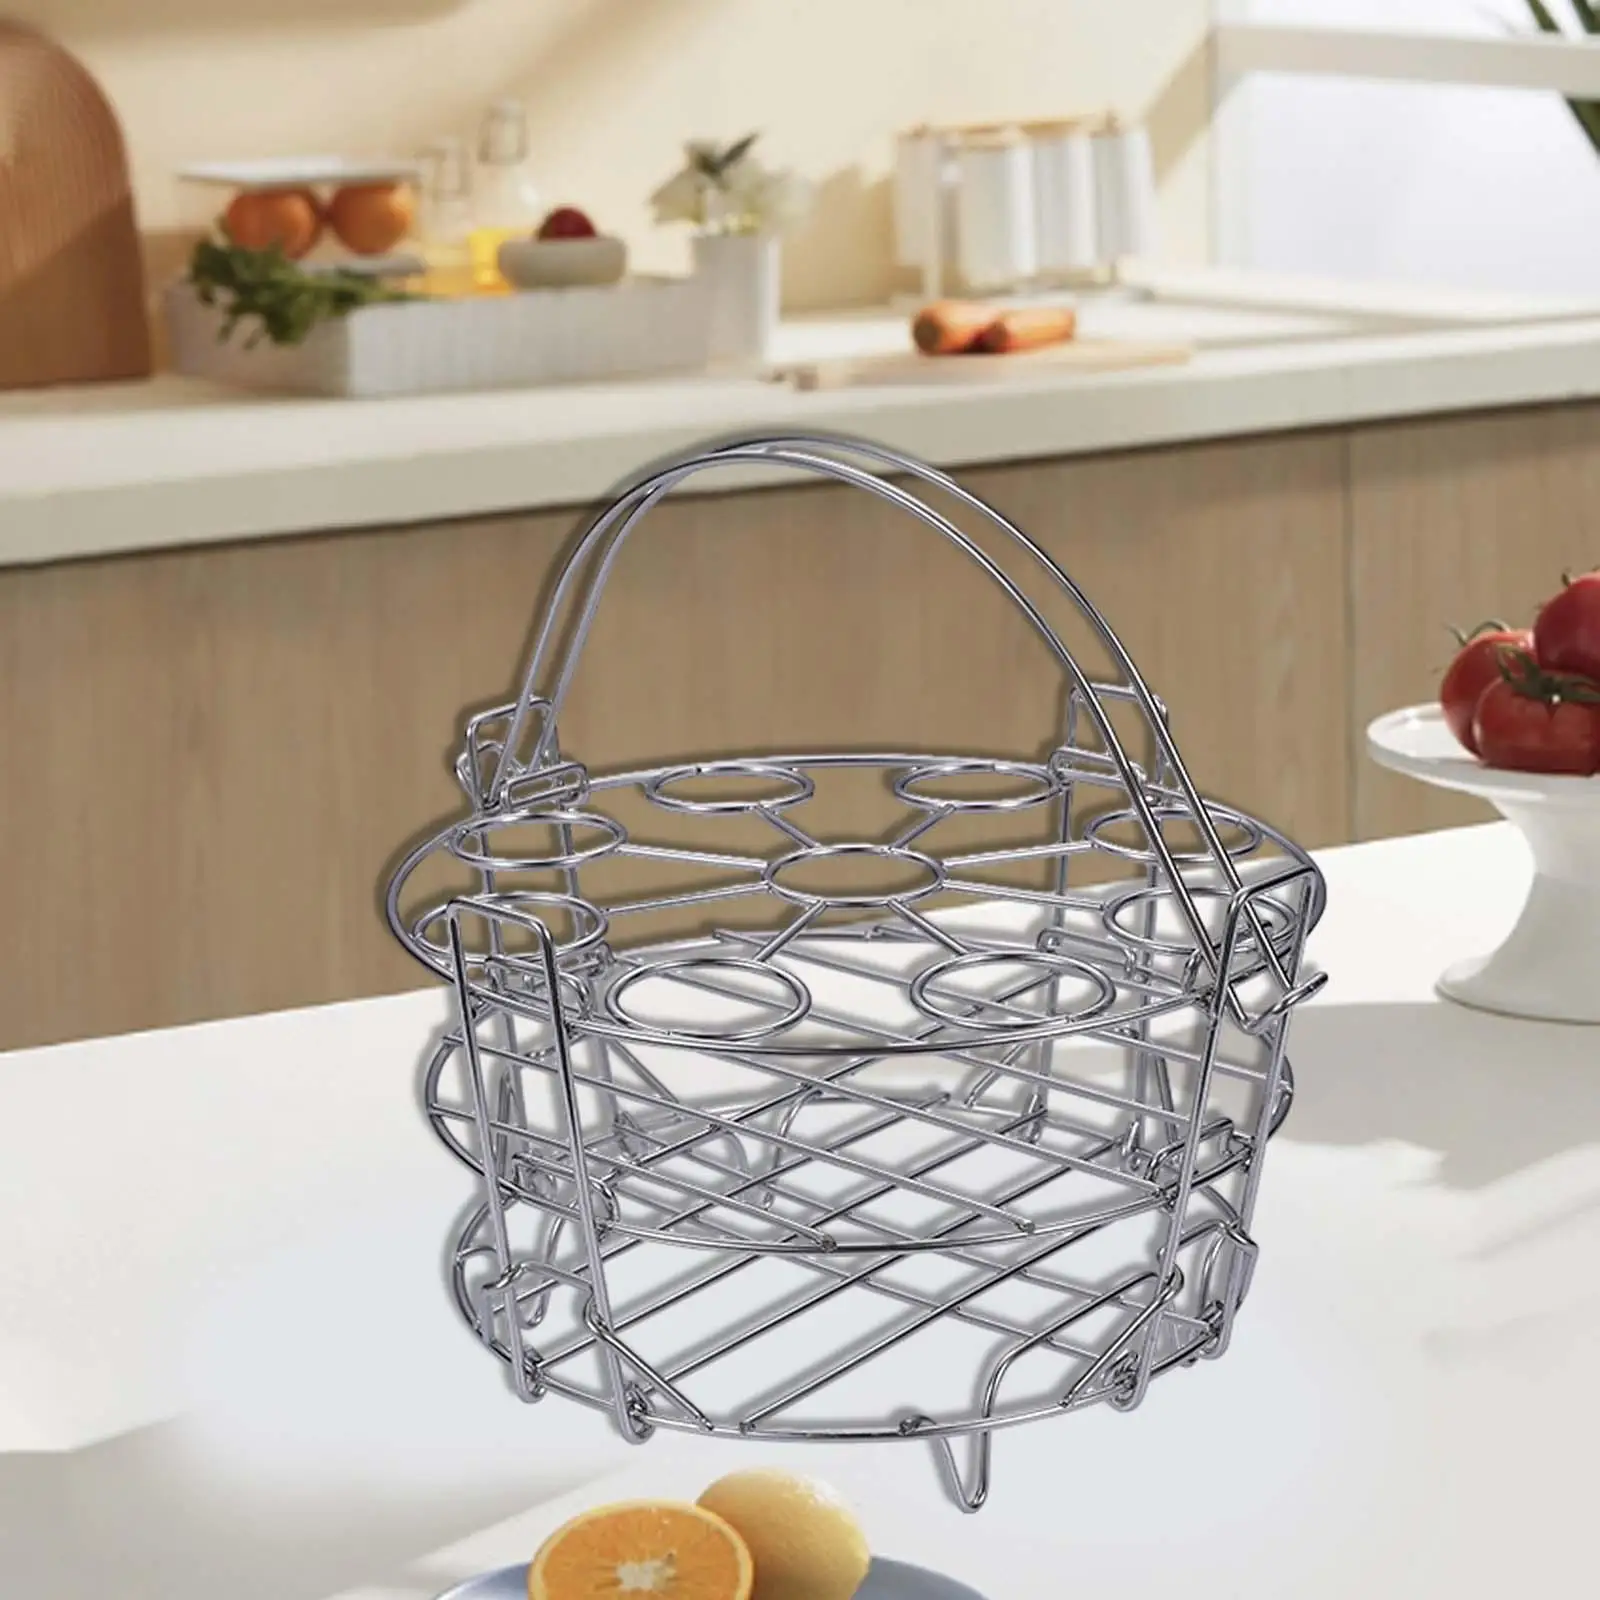 Steamer Basket Detachable 304 Stainless Steel Multifunctional Steaming Rack Stand for Kitchen Pan Cooker Pots Cooking